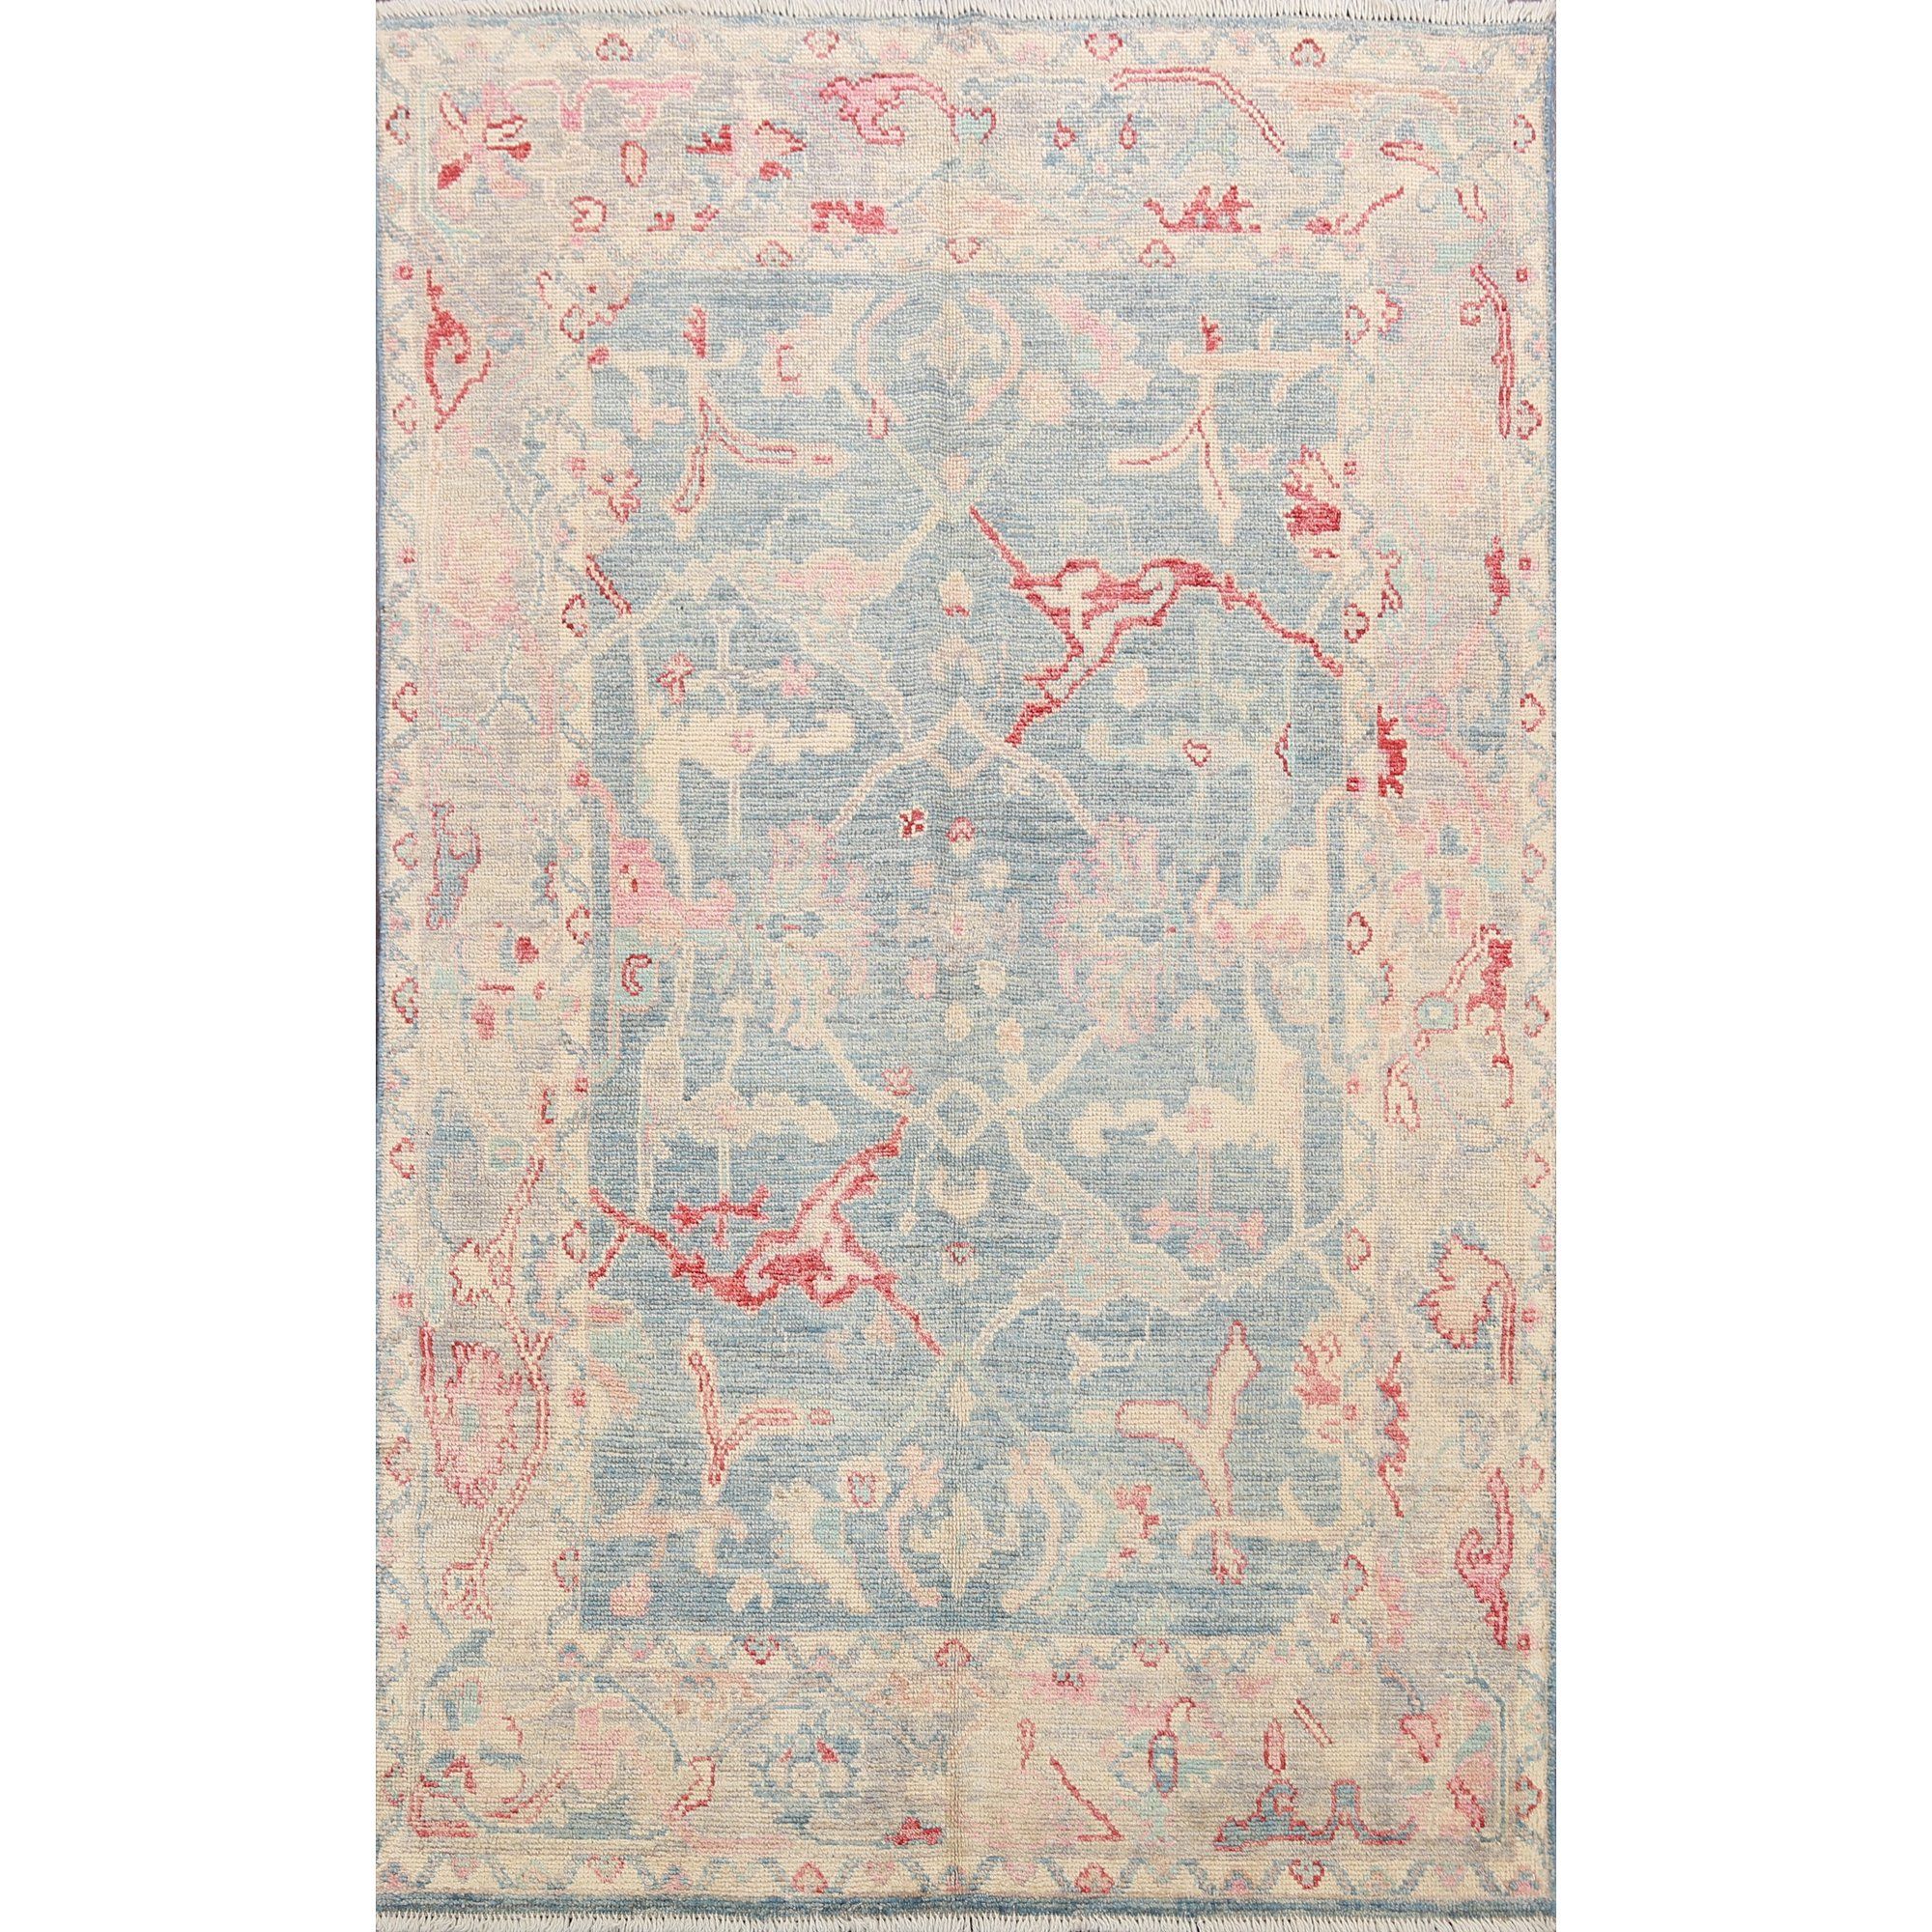 Distressed Floral Authentic Oushak Turkish Oriental Area Rug Wool Hand-knotted 5x7 | Walmart (US)